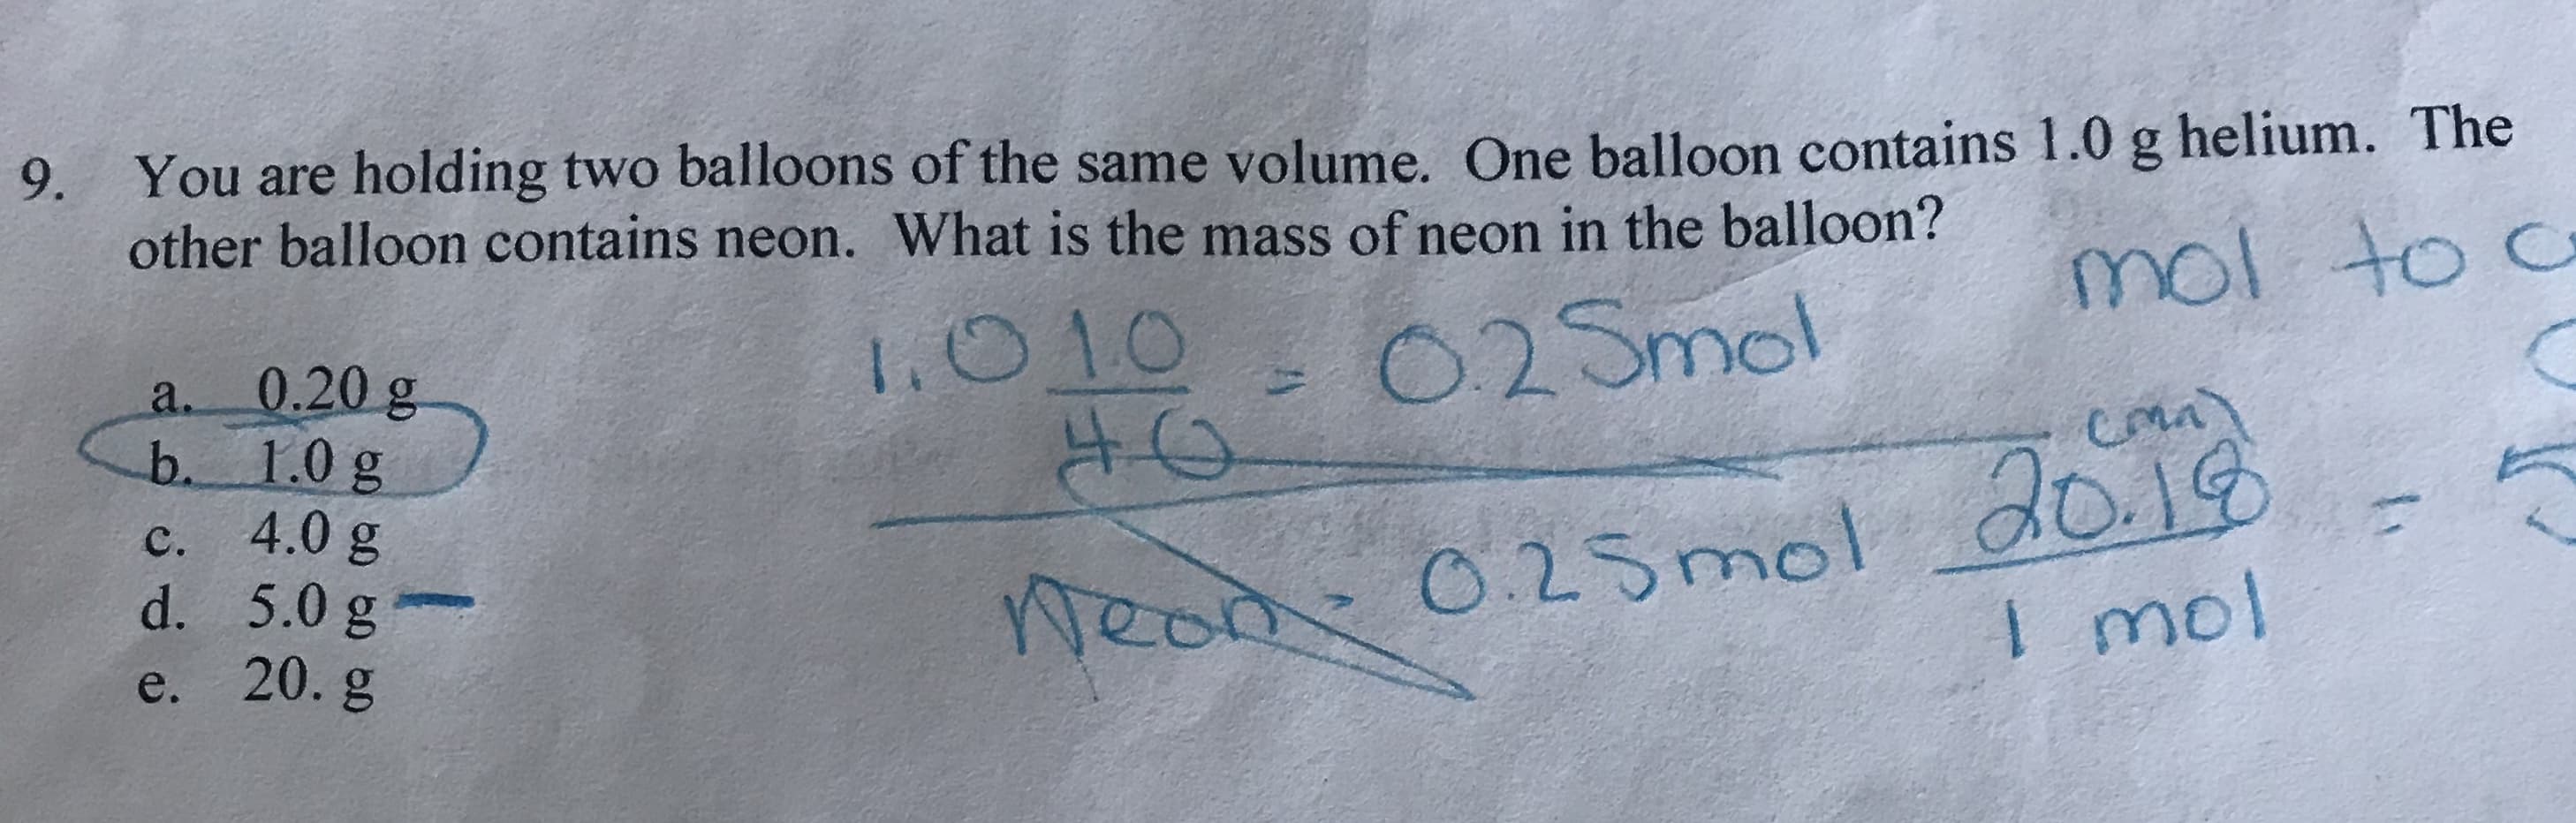 9. You are holding two balloons of the same volume. One balloon contains 1.0 g helium. The
other balloon contains neon. What is the mass of neon in the balloon?
mol to c
O2Smol
1.010
0.20 g
b. 1.0 g
4.0 g
d. 5.0 g
e. 20. g
a.
Weod 0.25mol dog
I mol
с.
1
